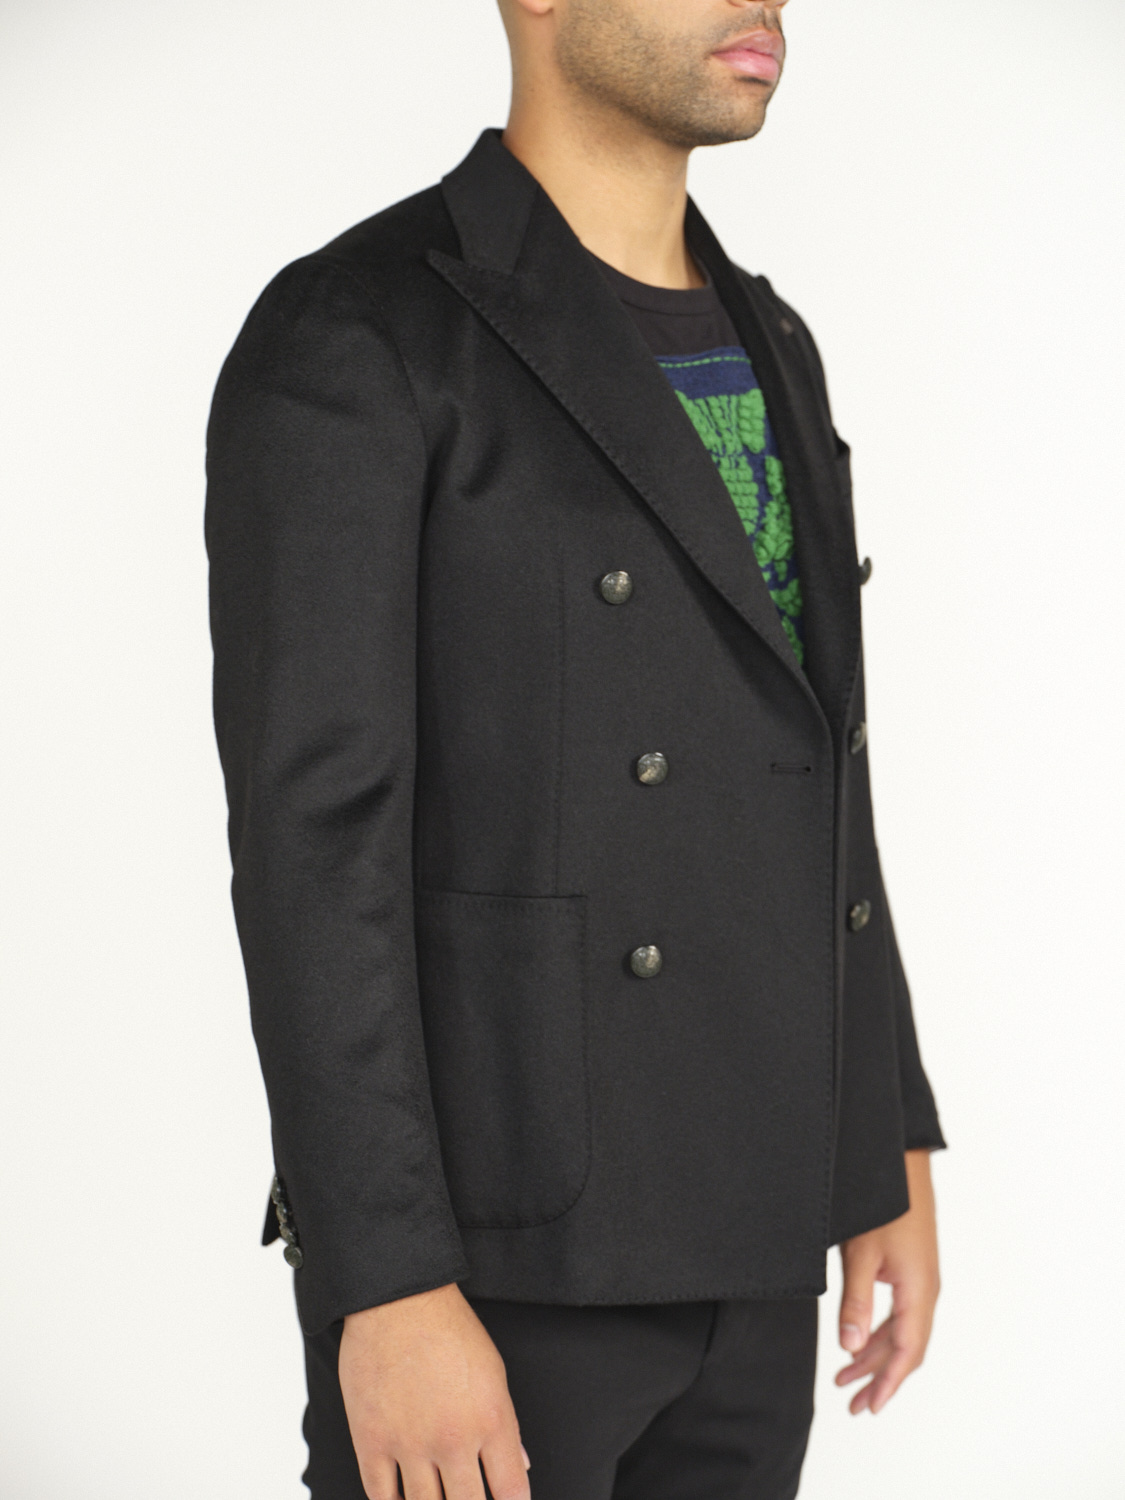 TAGLIATORE Jacket with double breasted button placket in virgin wool black 48